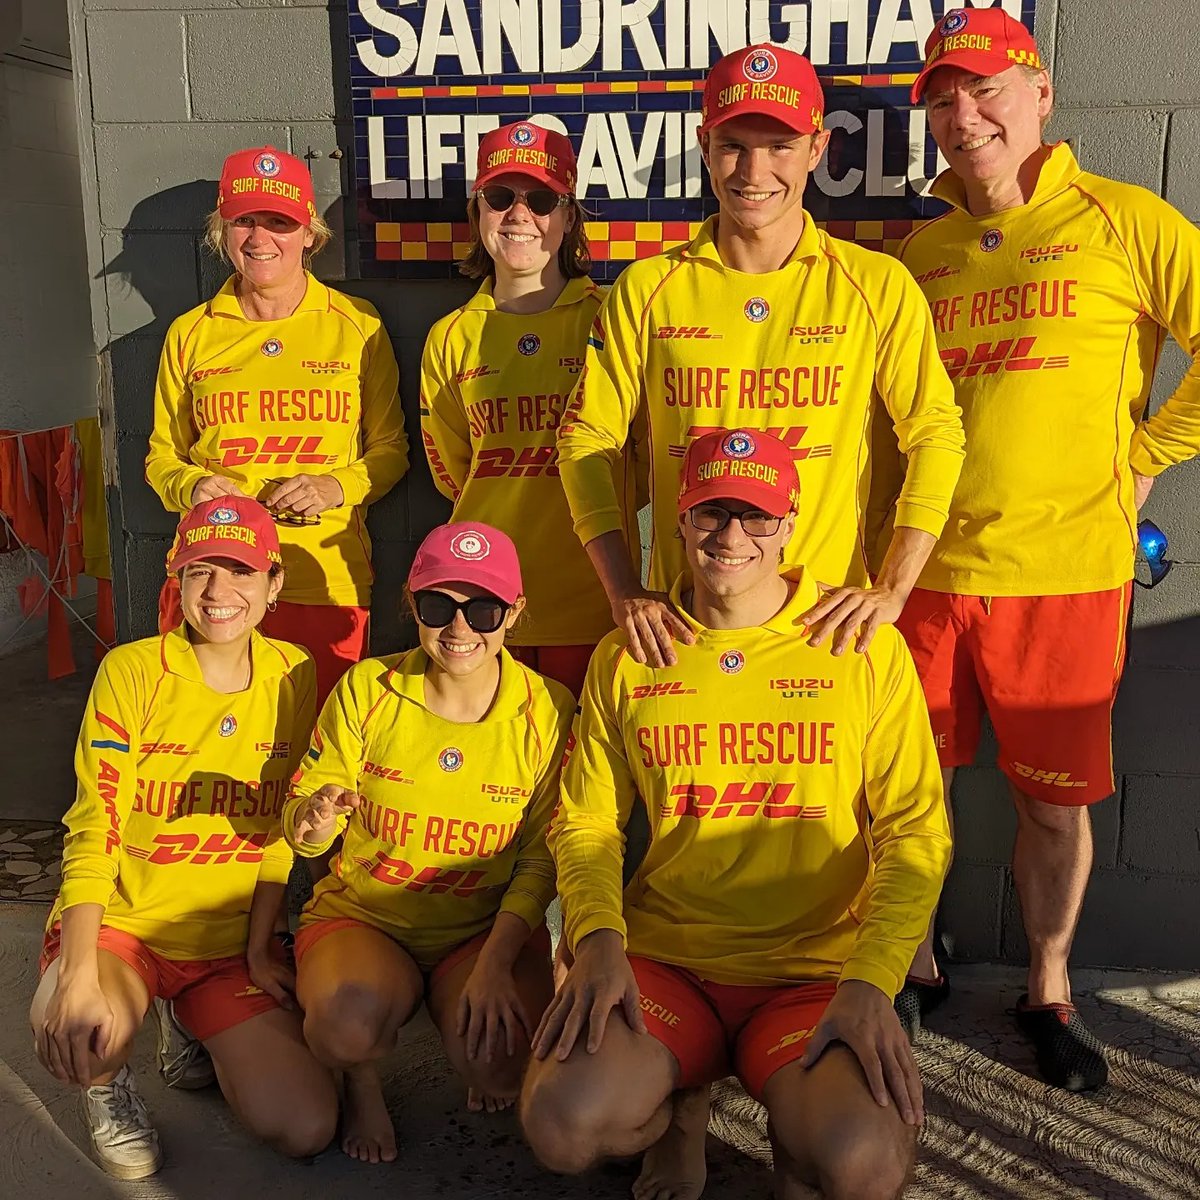 This month, we mark the end of the patrol season. To all our volunteers and lifeguards – THANK YOU for your extraordinary efforts. Read more: bit.ly/4a6Pxd6 📸 Waratah Beach, Lakes Entrance and Sandringham acknowledge the end of their patrol season